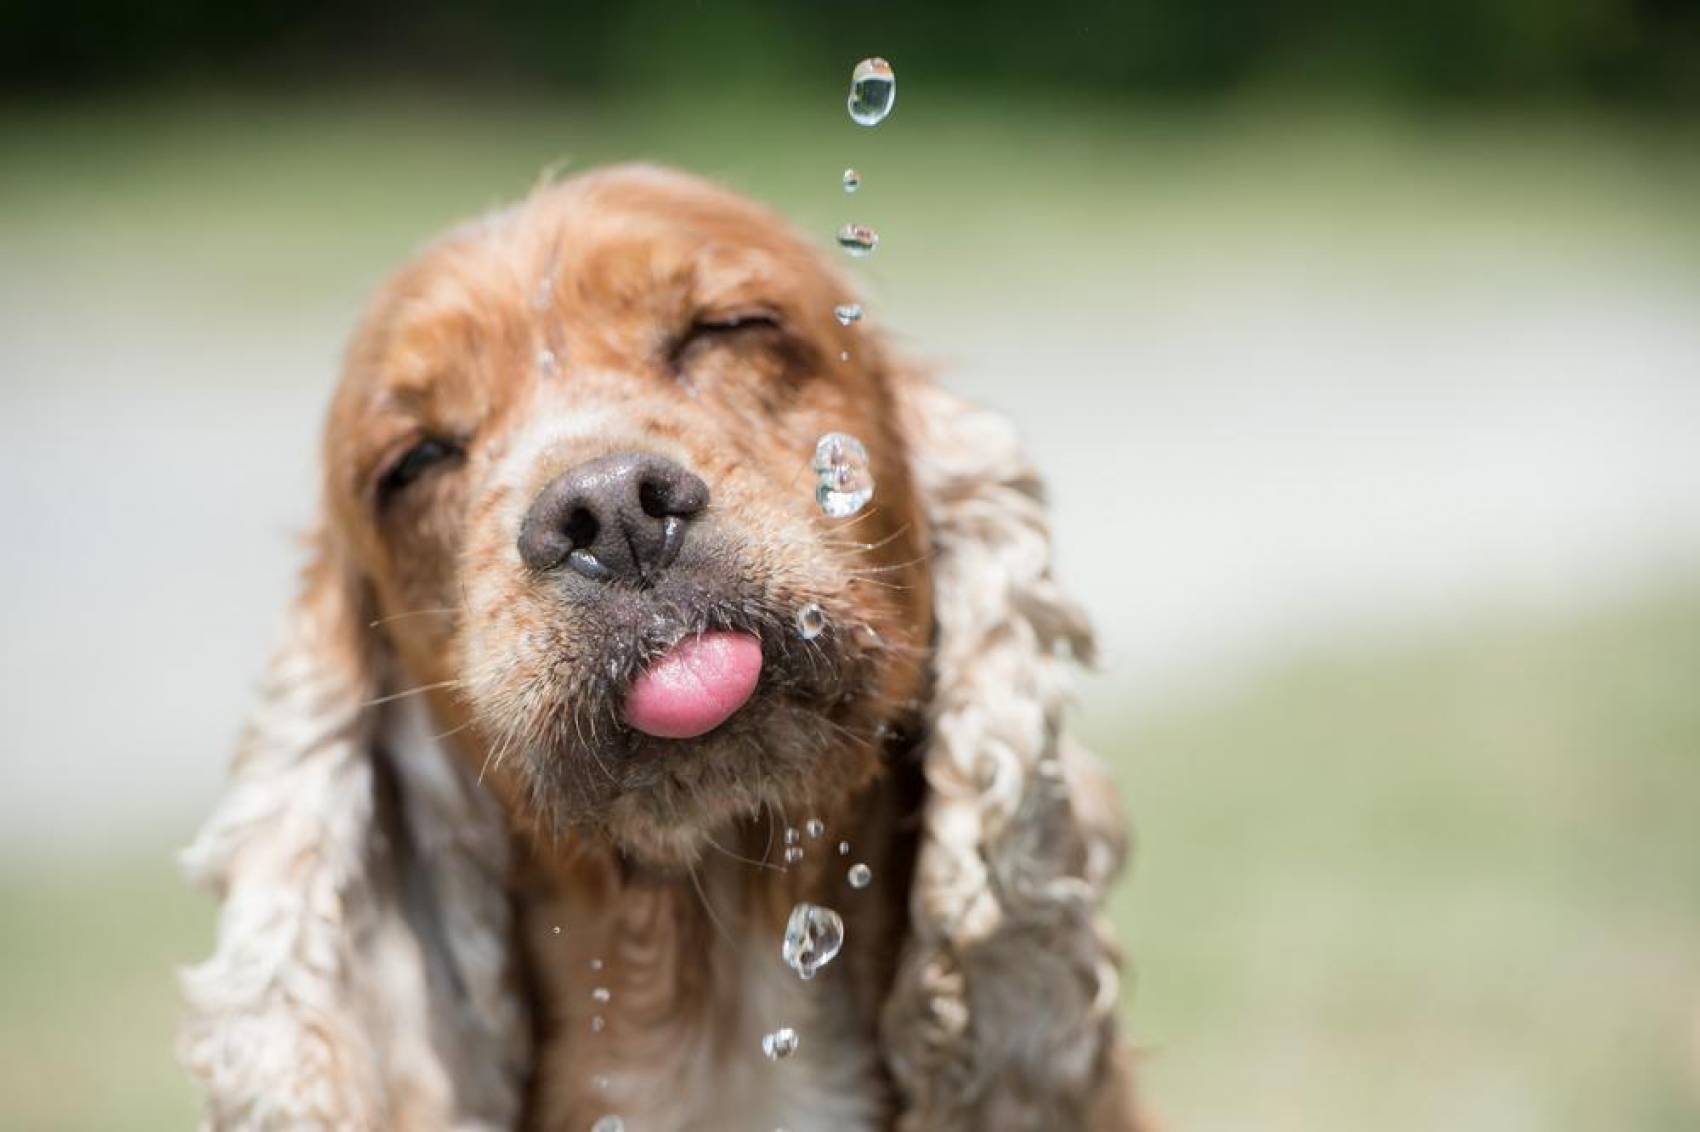 Dogs Drinking Excessive Water: What Does It Mean?